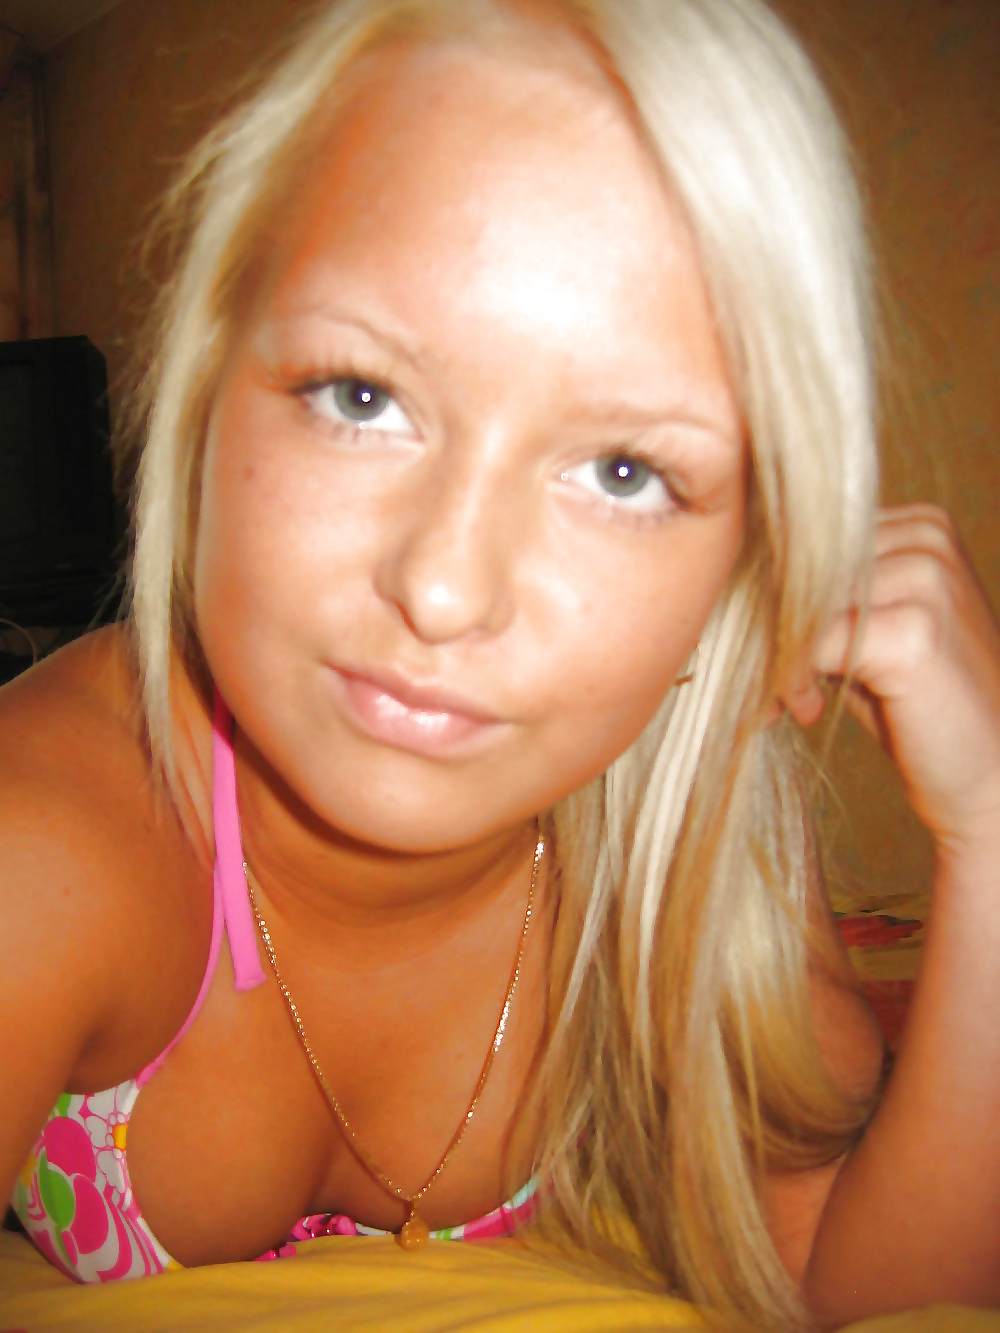 Amateur teen linda 18 from germany hot